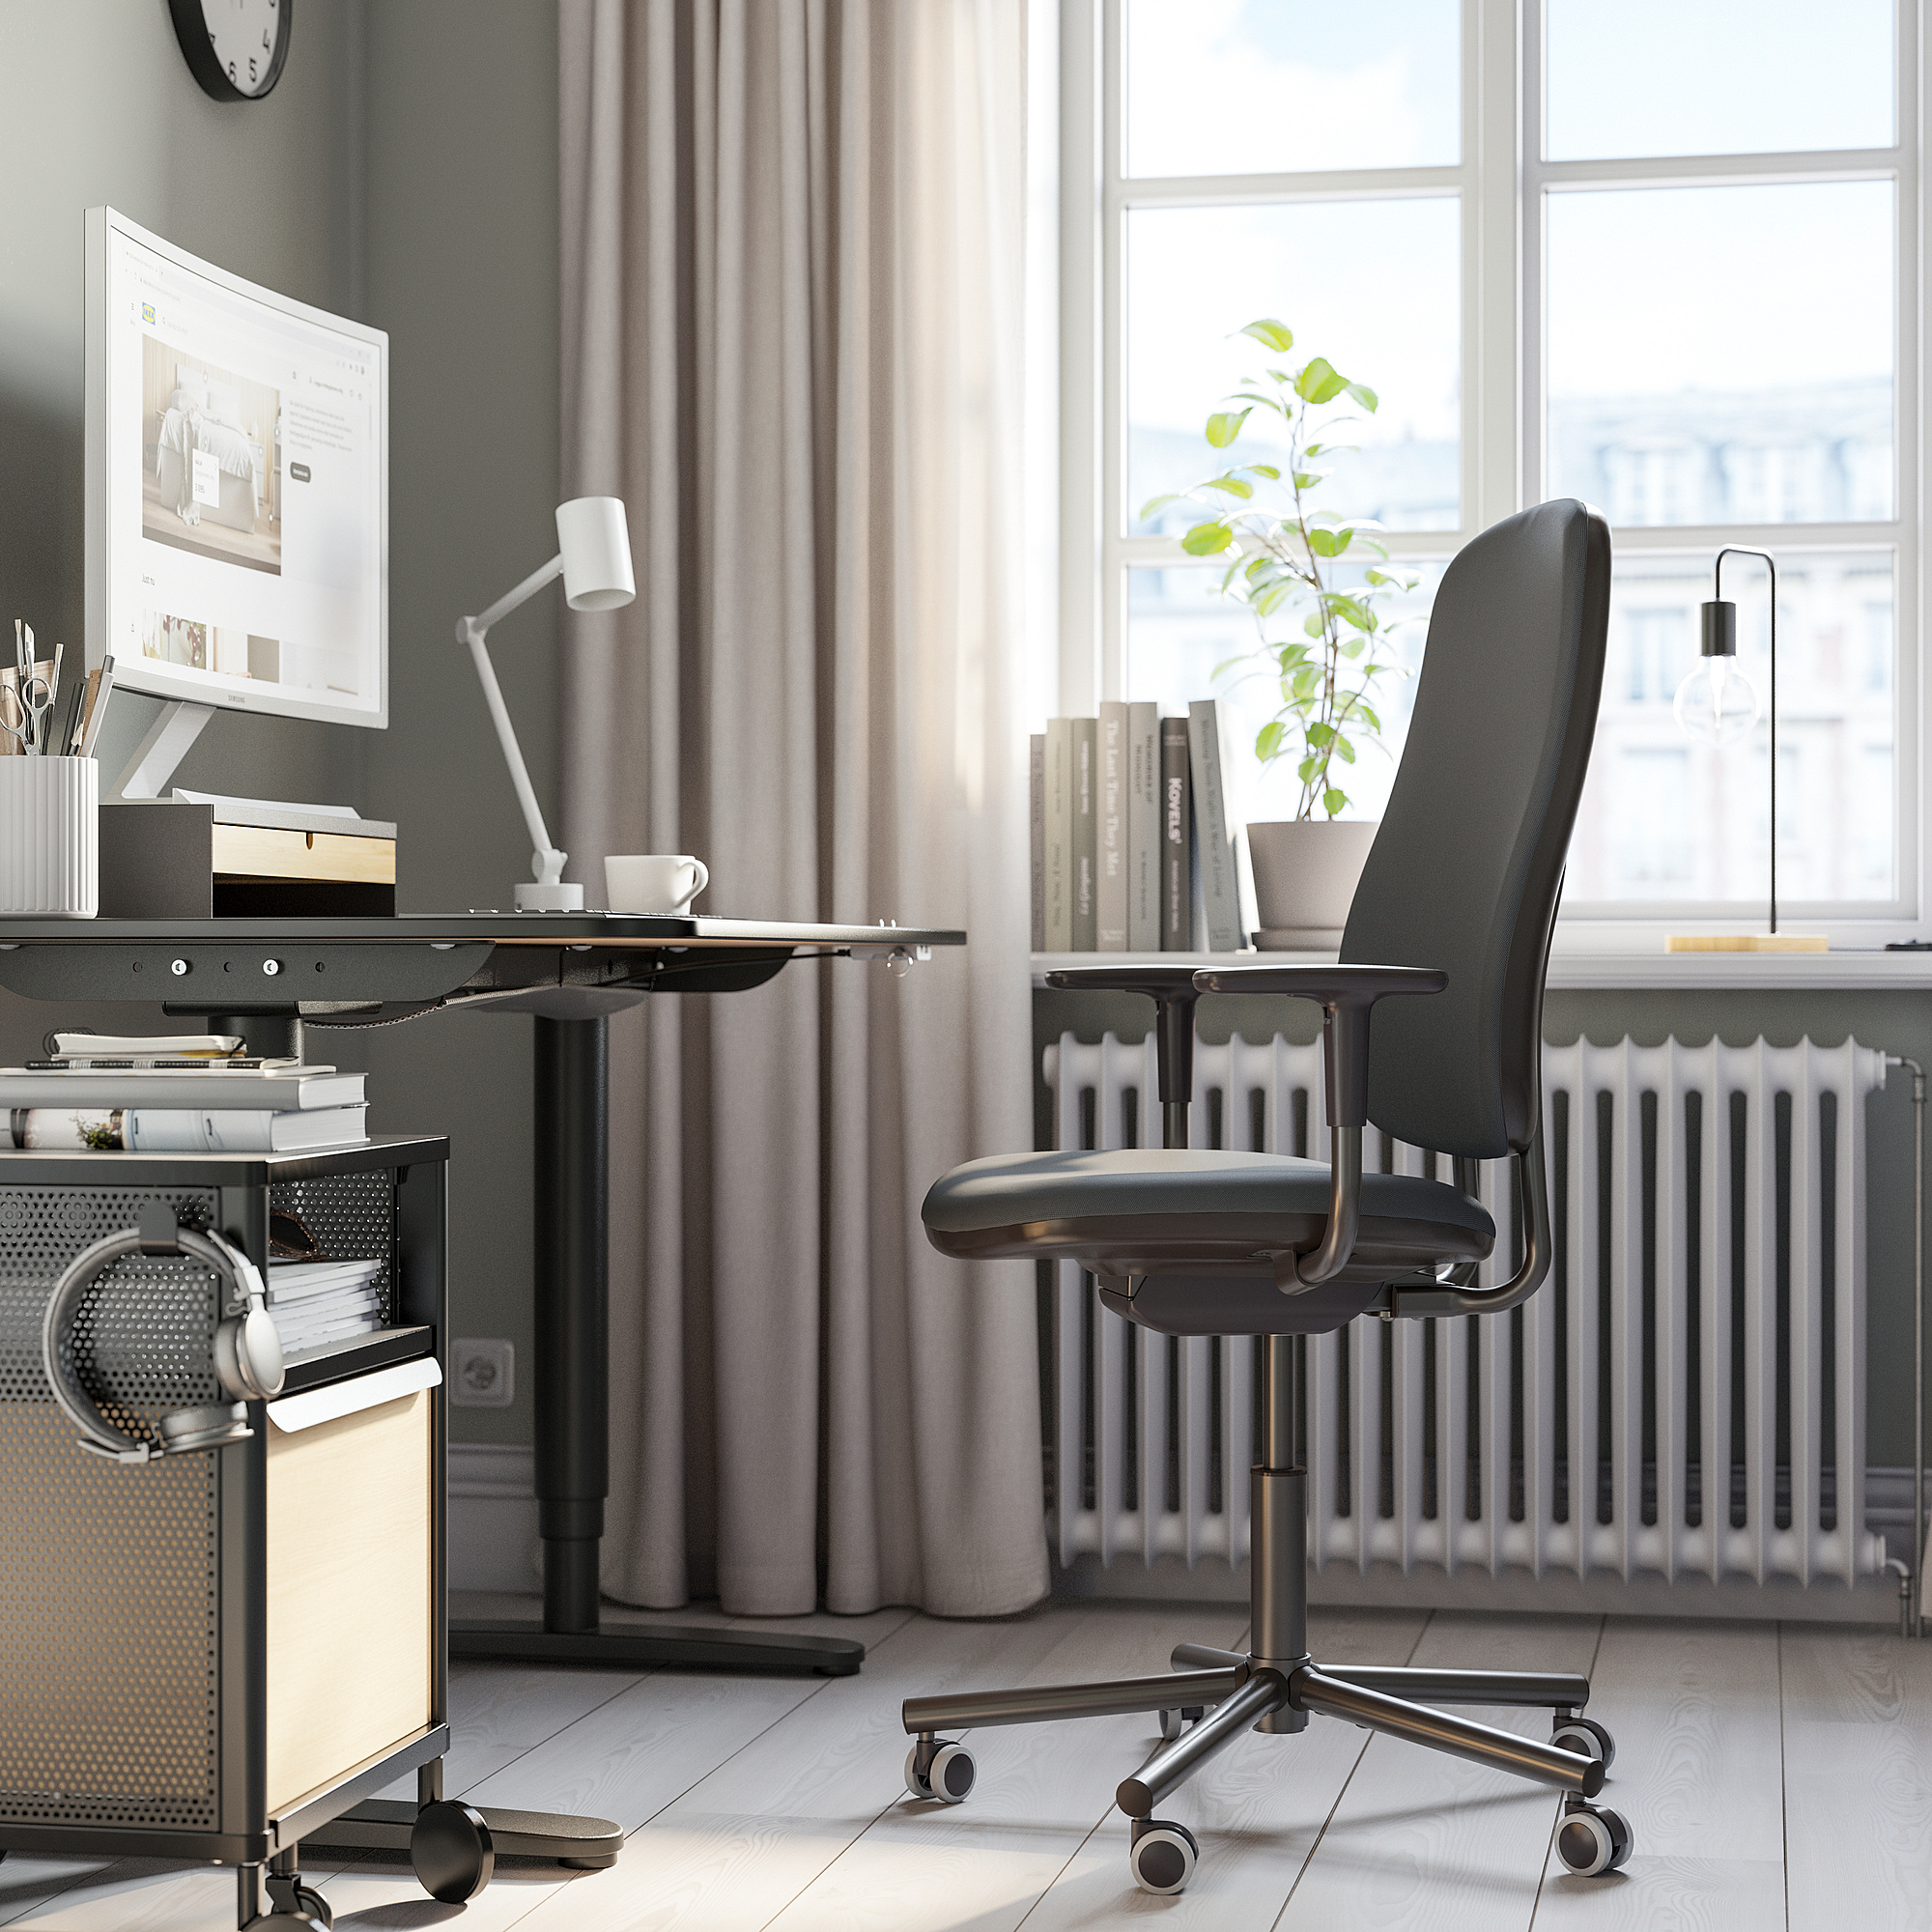 SMÖRKULL office chair with armrests